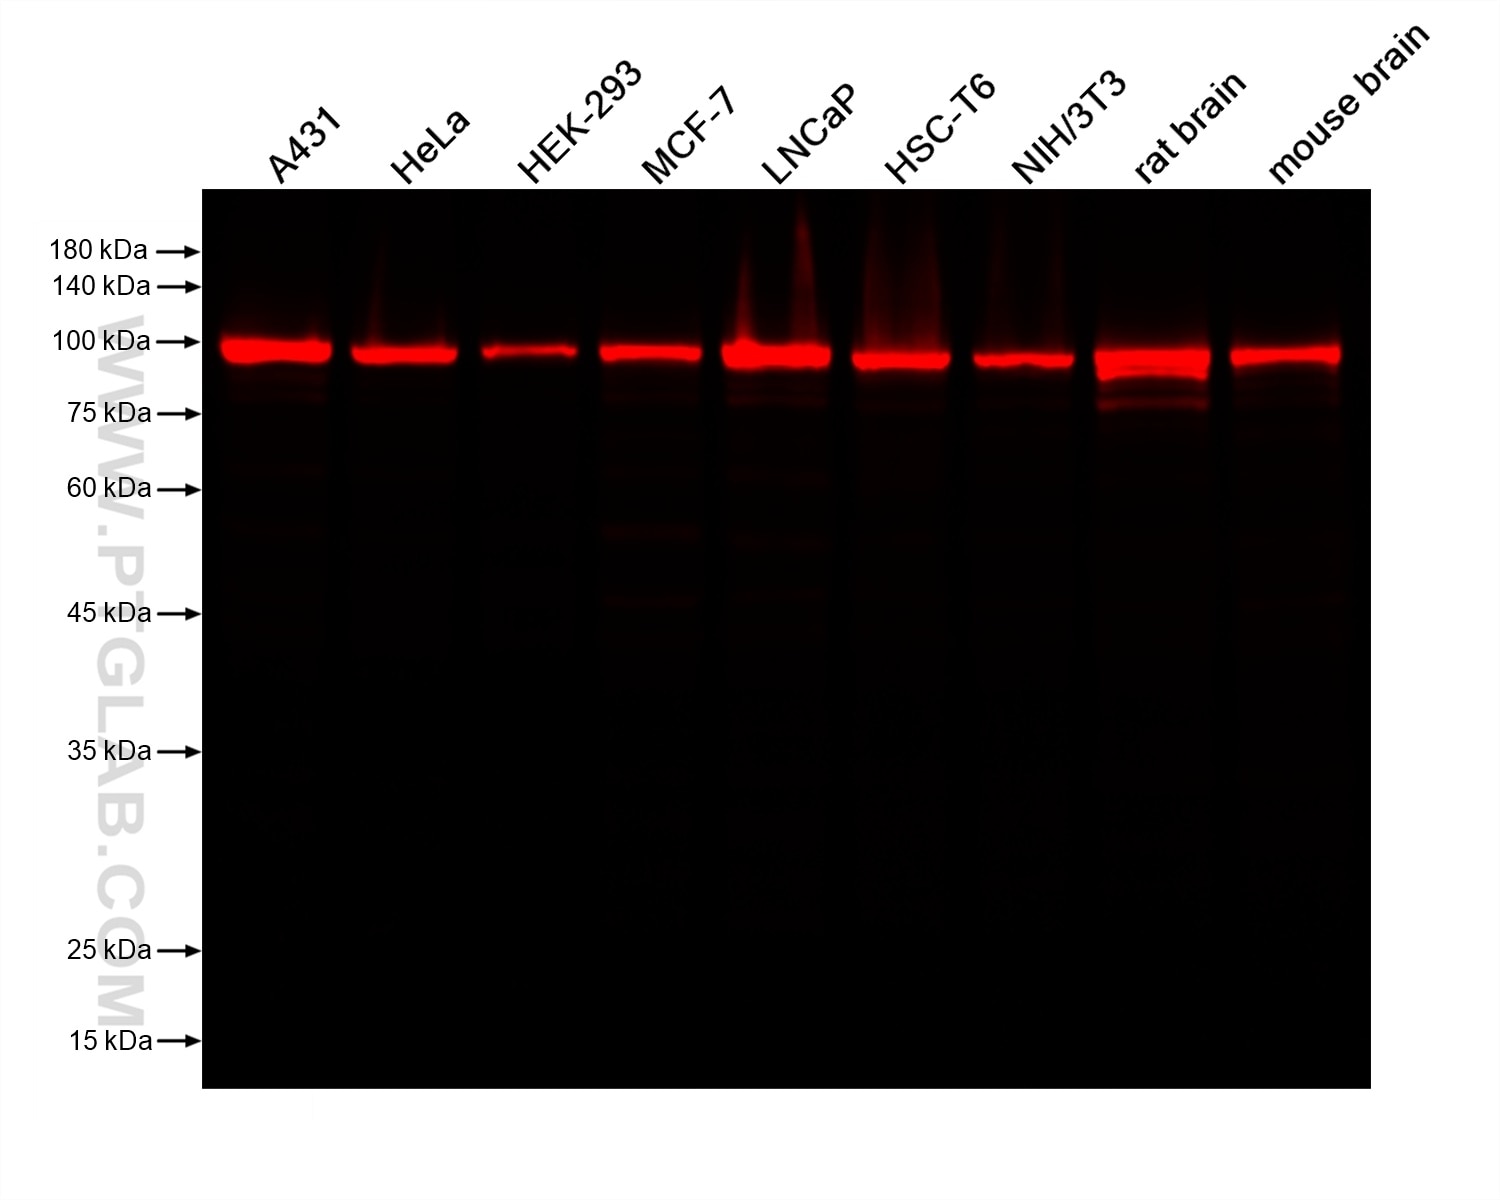 Various lysates were subjected to SDS-PAGE followed by western blot with Rabbit anti-Beta Catenin recombinant antibody (Cat.NO. 80488-1-RR) at dilution of 1:40000. Multi-rAb CoraLite® Plus 750-Goat Anti-Rabbit Recombinant Secondary Antibody (H+L) RGAR006 was used at 1:10000 for detection. 